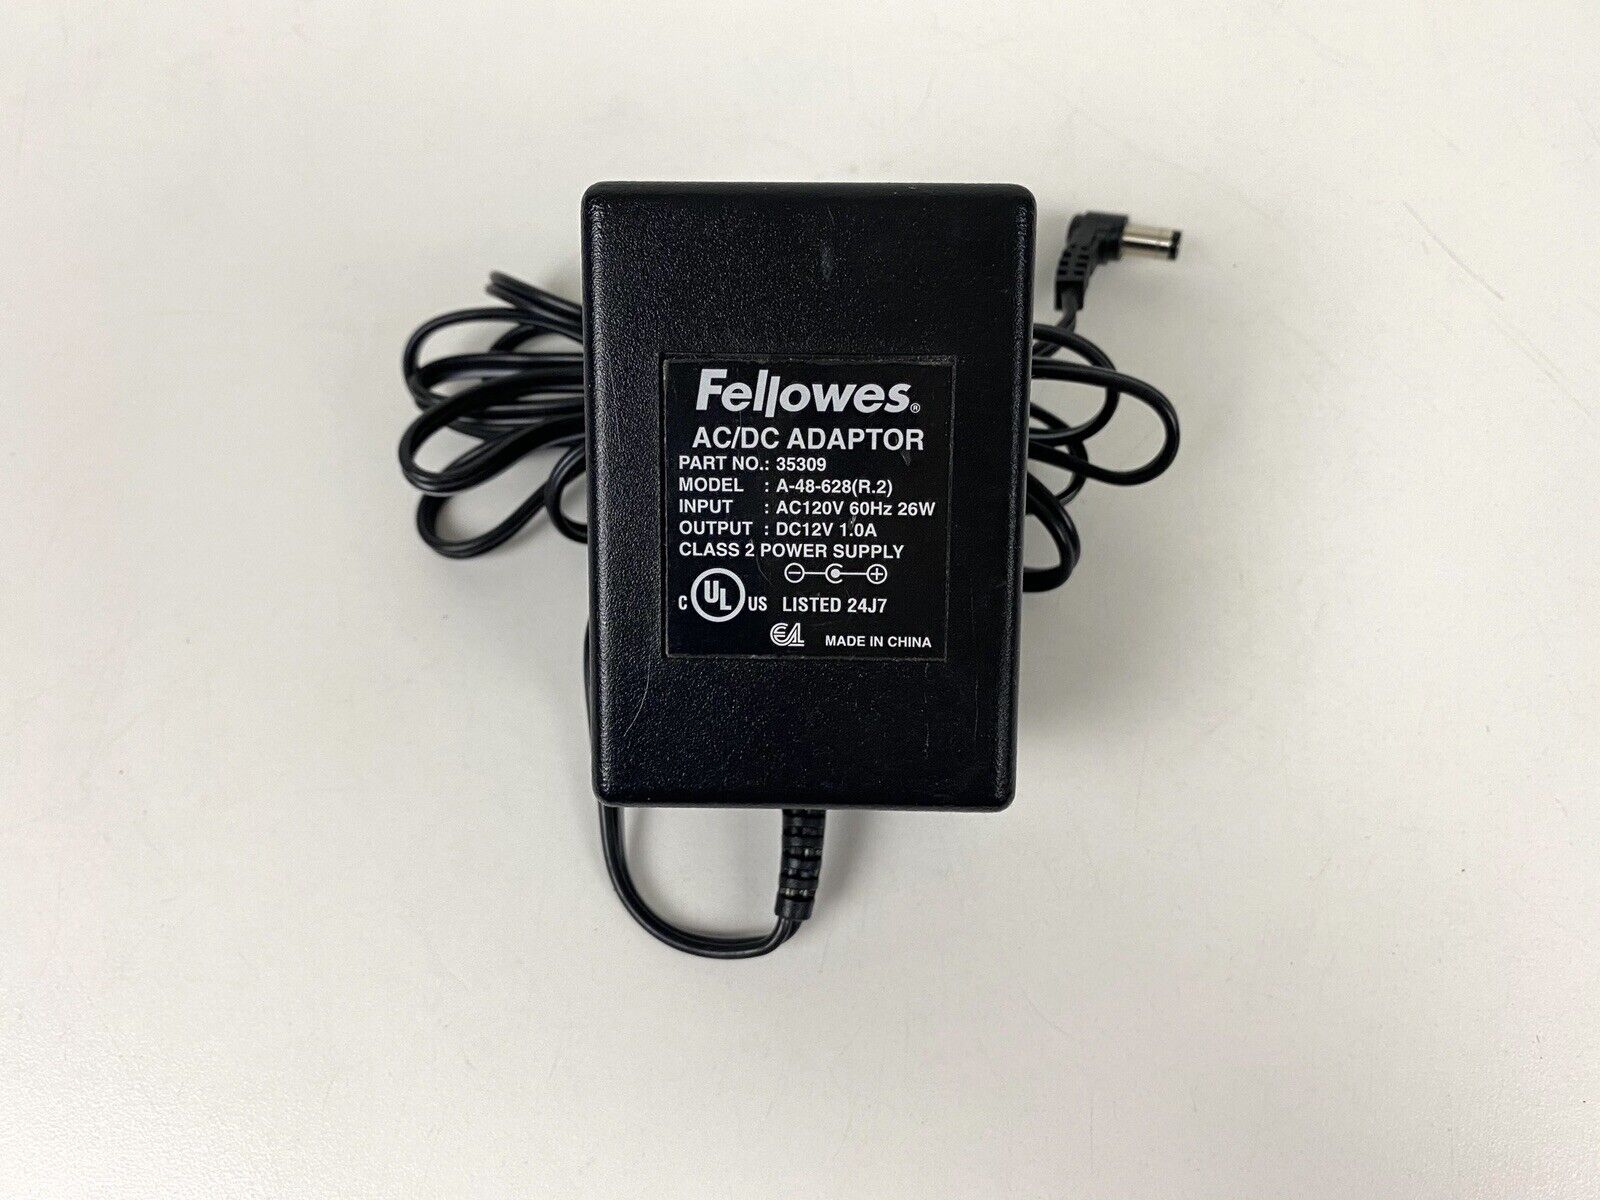 Fellowes Paper Cutter AC/DC adapter 35309 Power Supply A-48-628 r.2 Features: Powered Brand: FELLOWES Type: AC/DC A - Click Image to Close